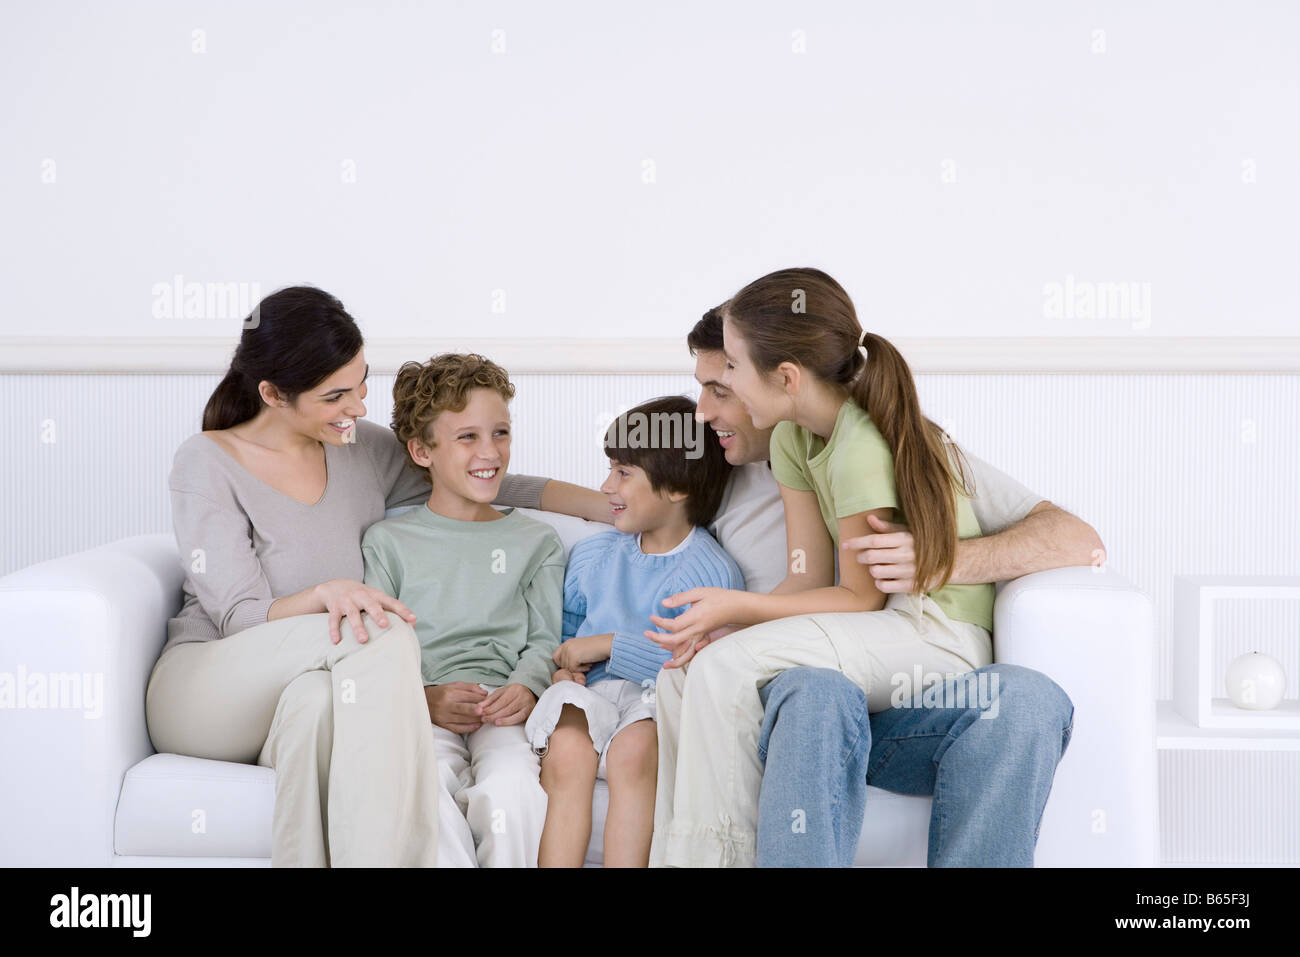 Family with three children sitting together on sofa, talking Stock Photo